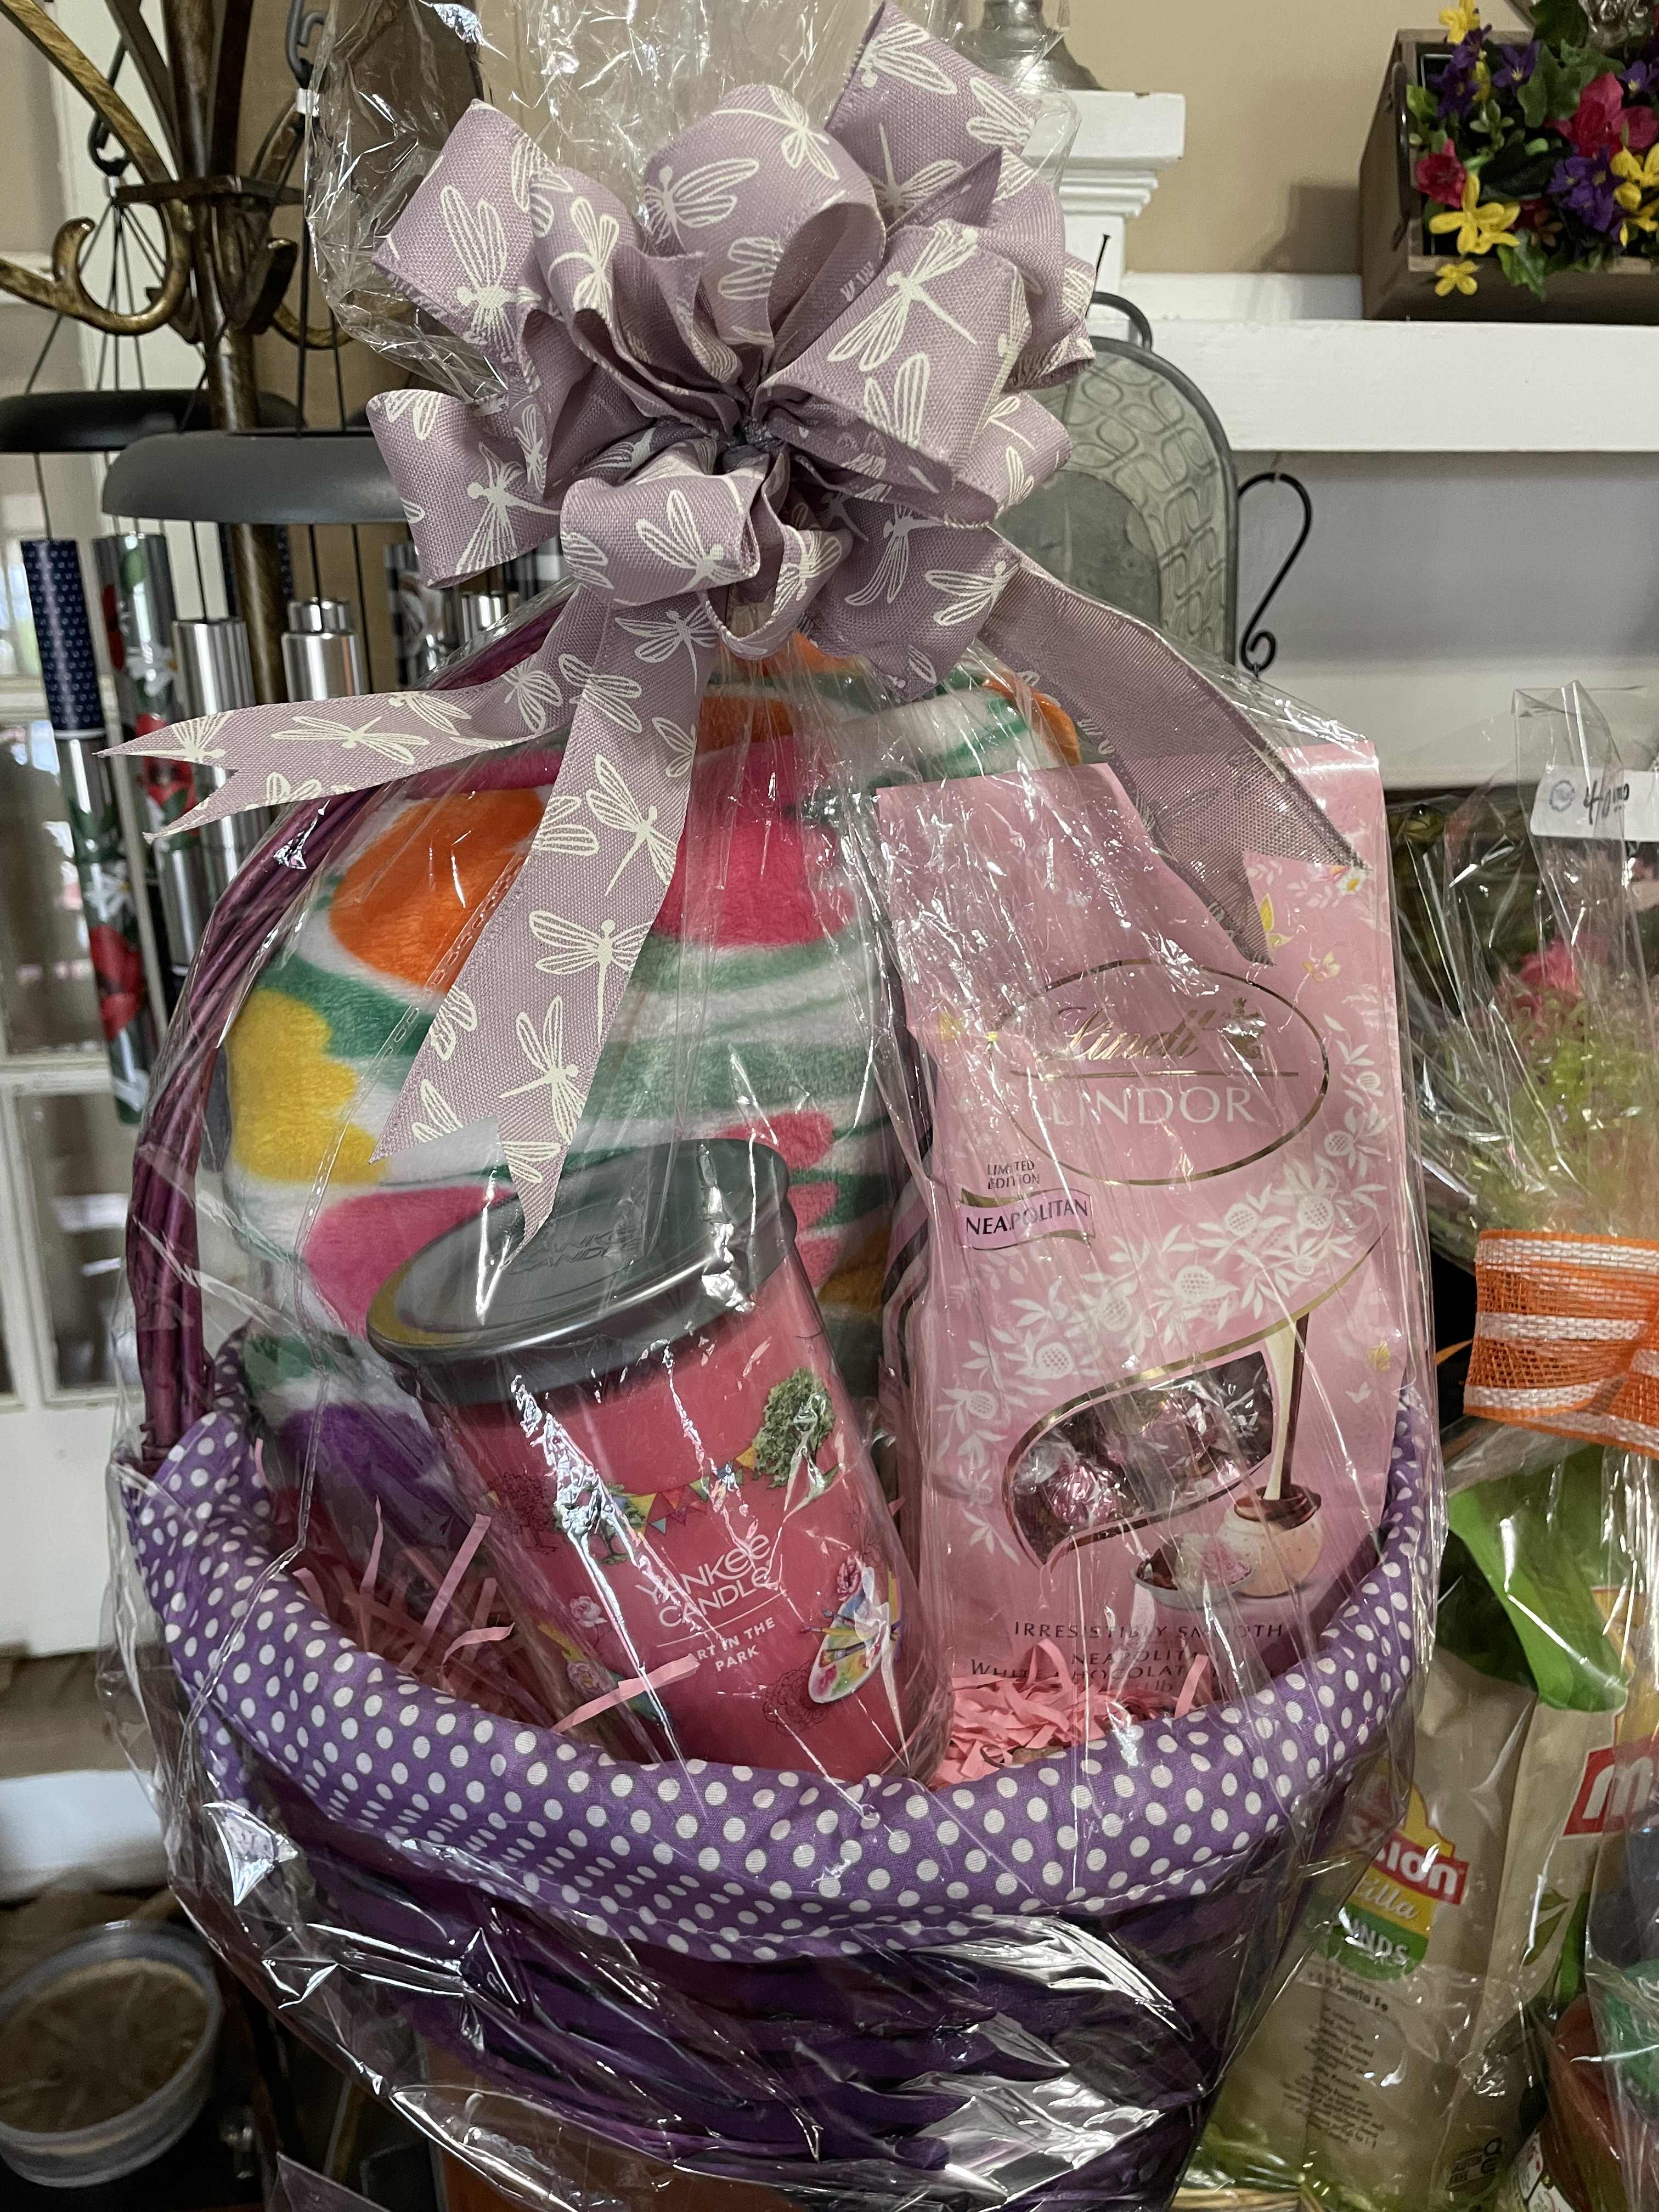 Happy Tulip Happy GiftBasket - A Large Soft and cozy throw, so sweet covered in tulip pattern. Wrapped up for the home in a purple basket with a bag of Truffles , yankee candle.